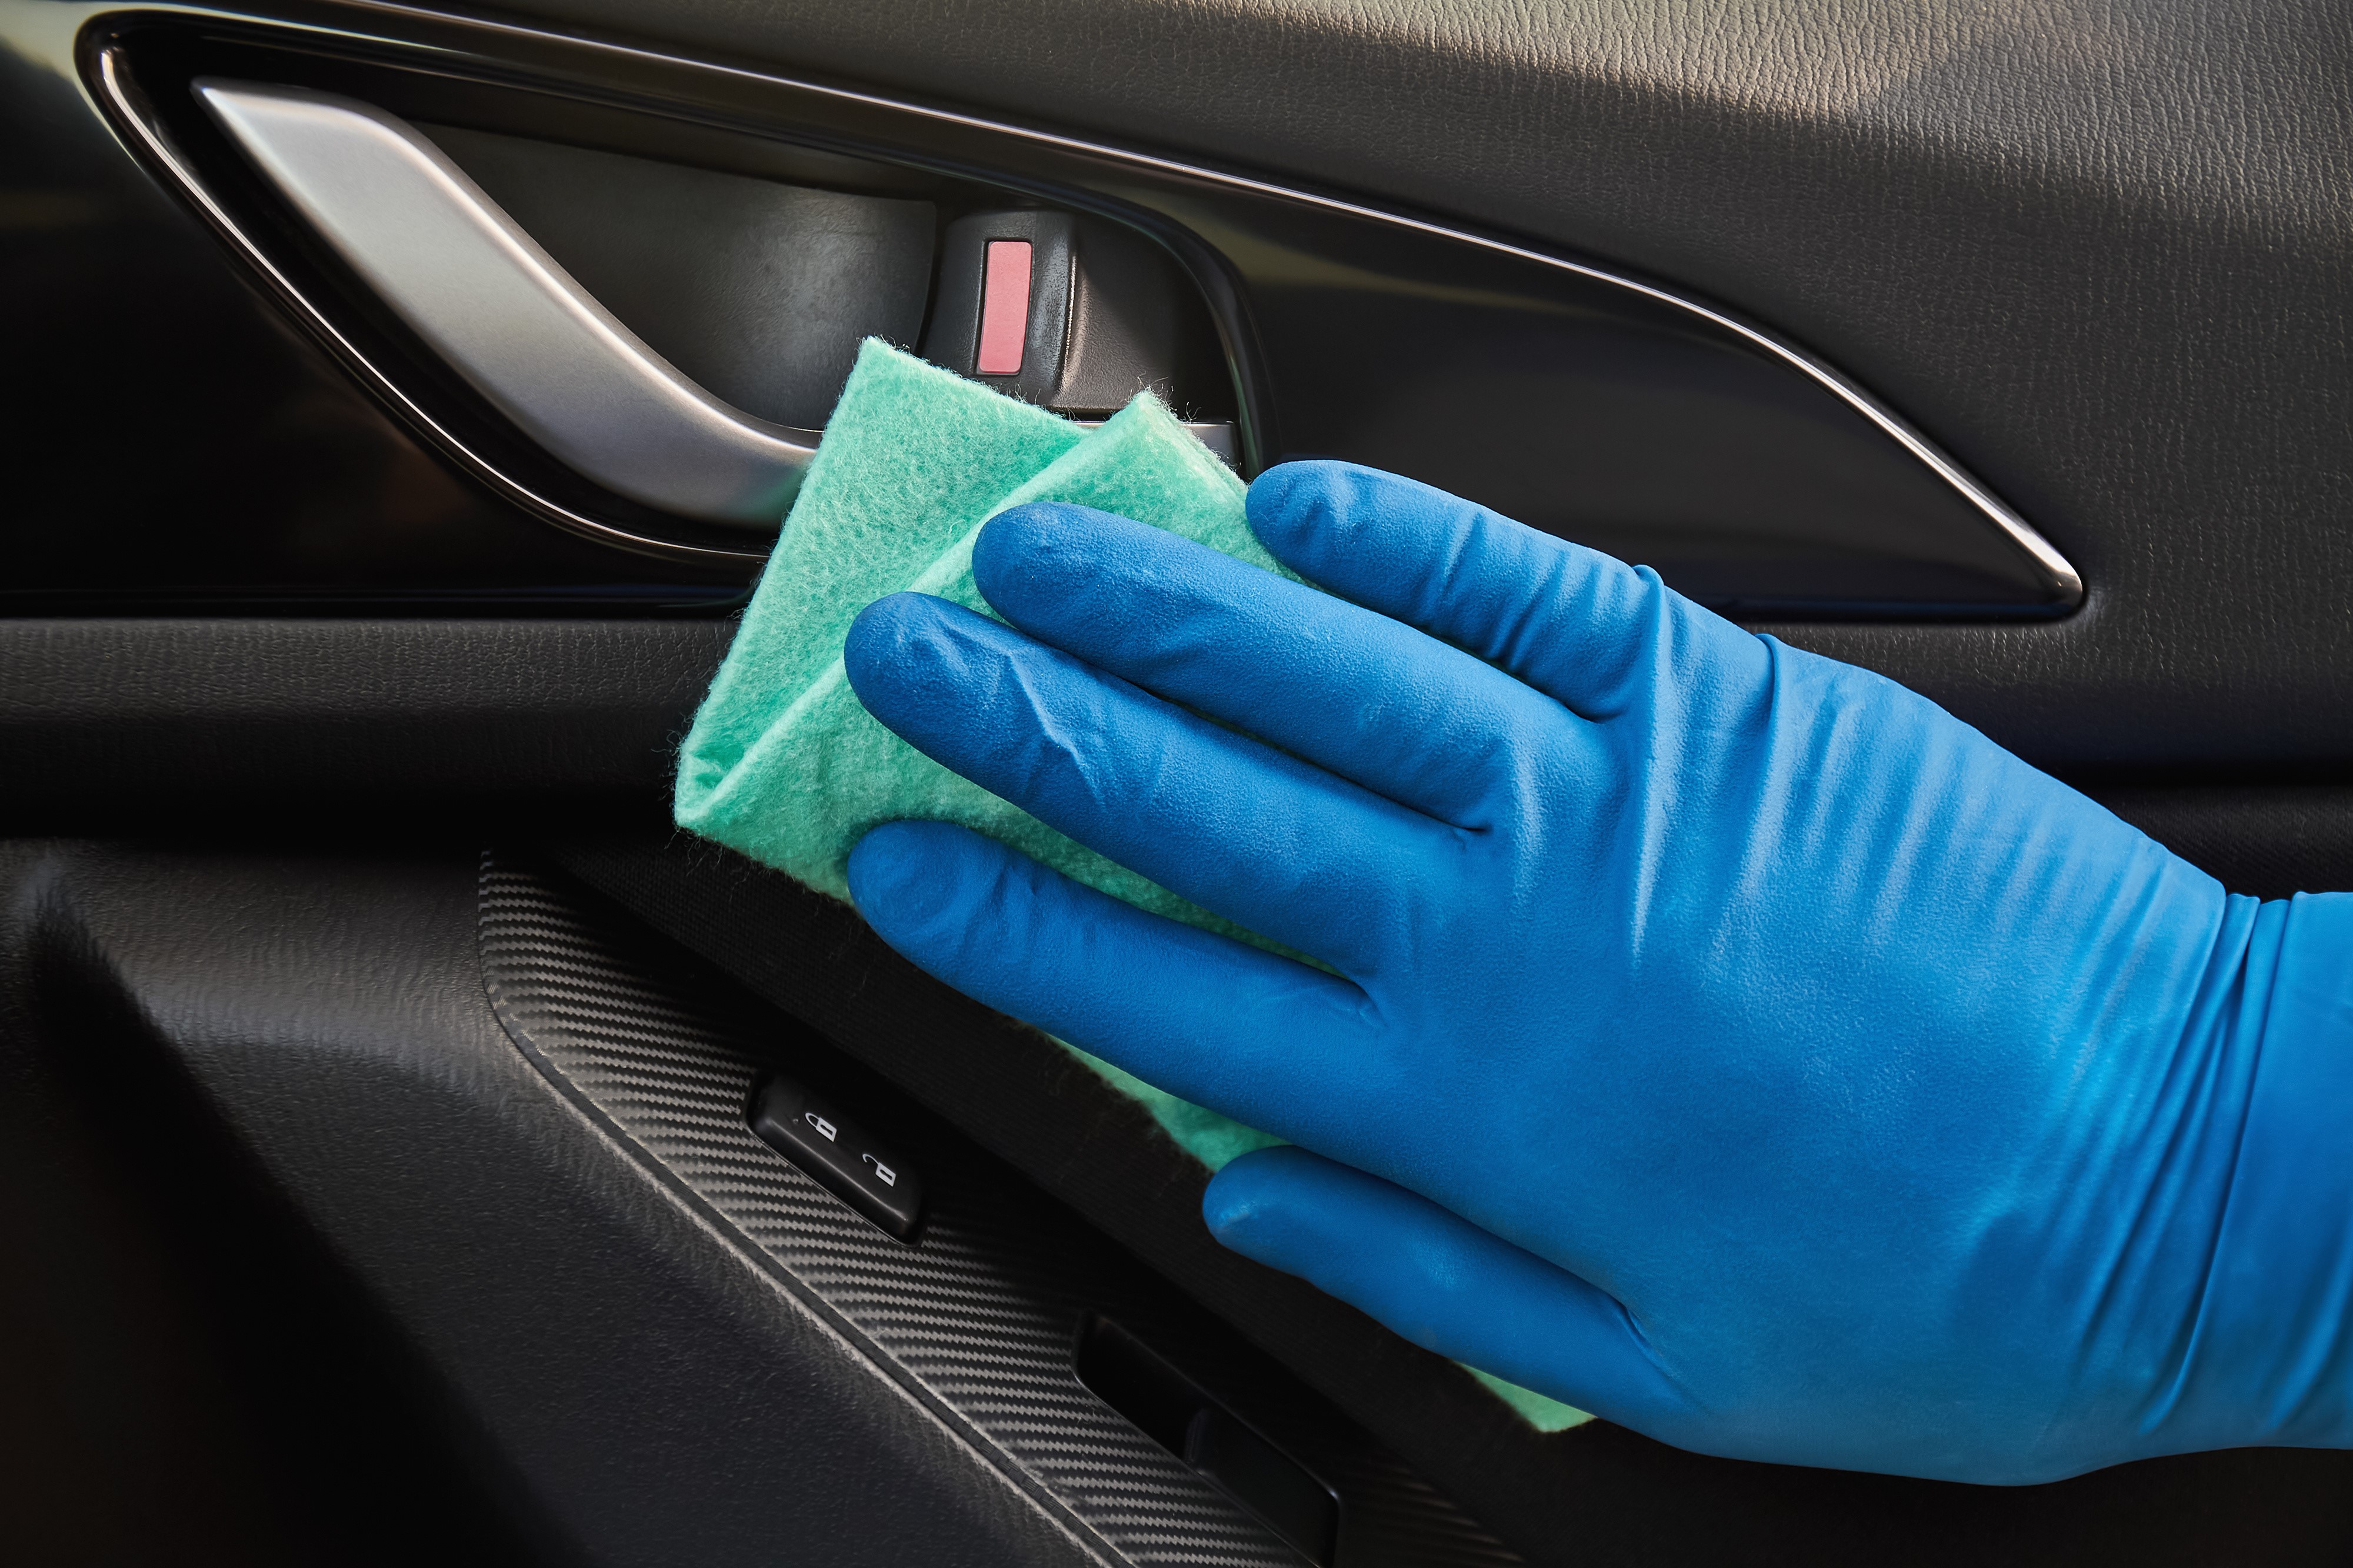 Hand in Glove Cleaning Interior of Car With Microfiber Towel